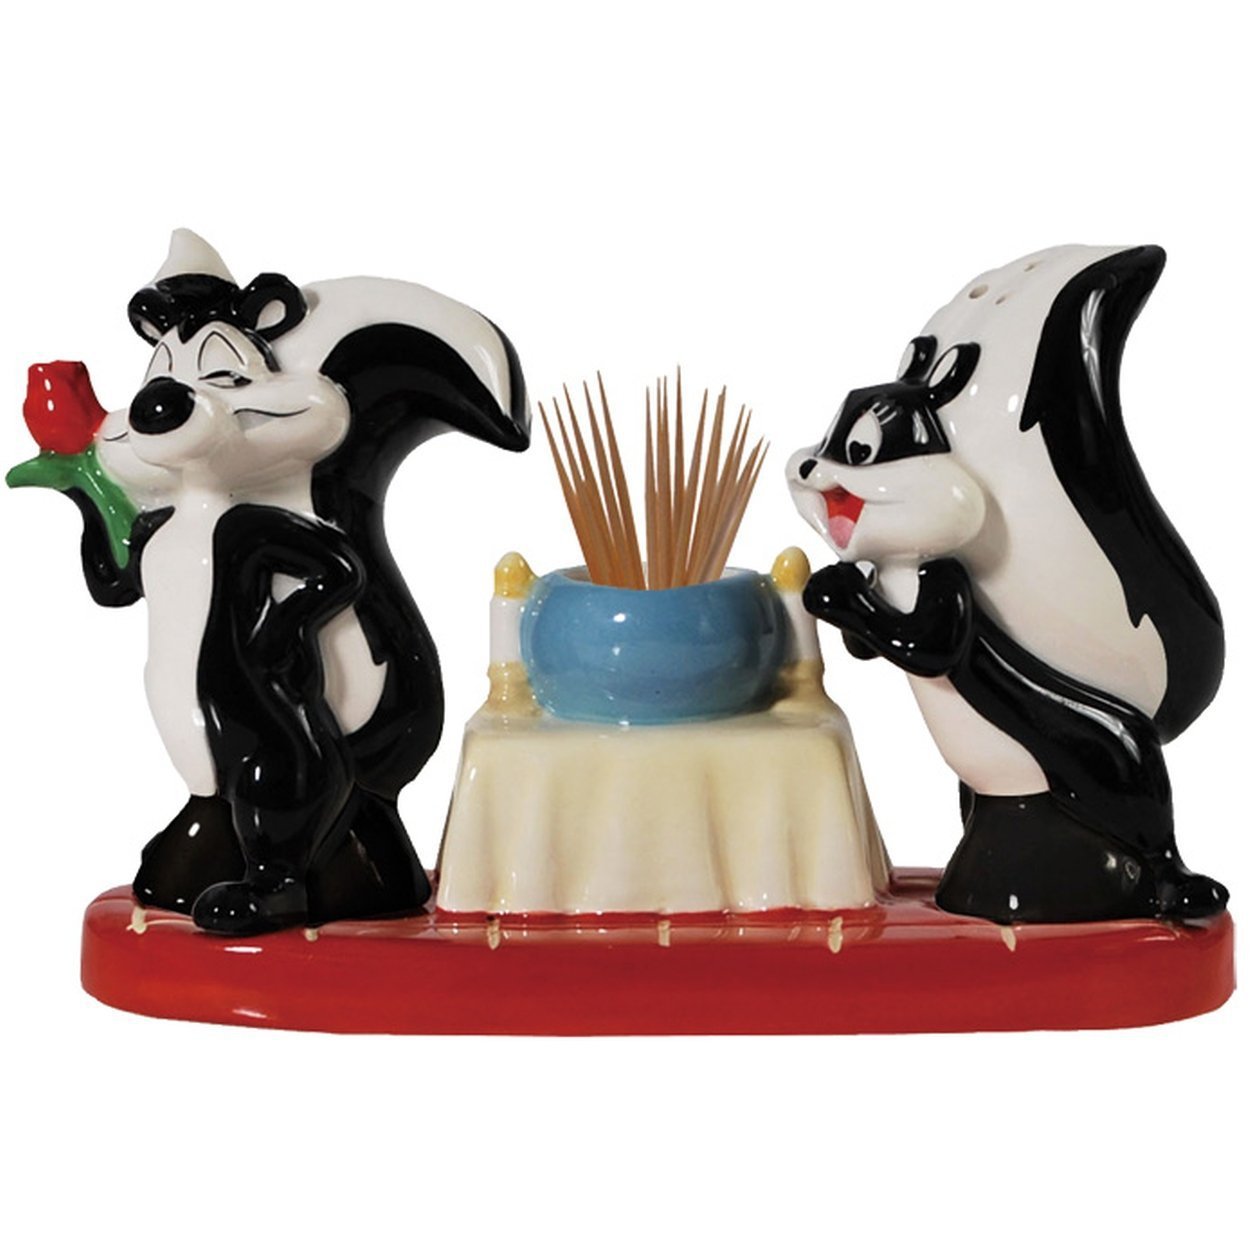 Pepe le pew salt and pepper shaker